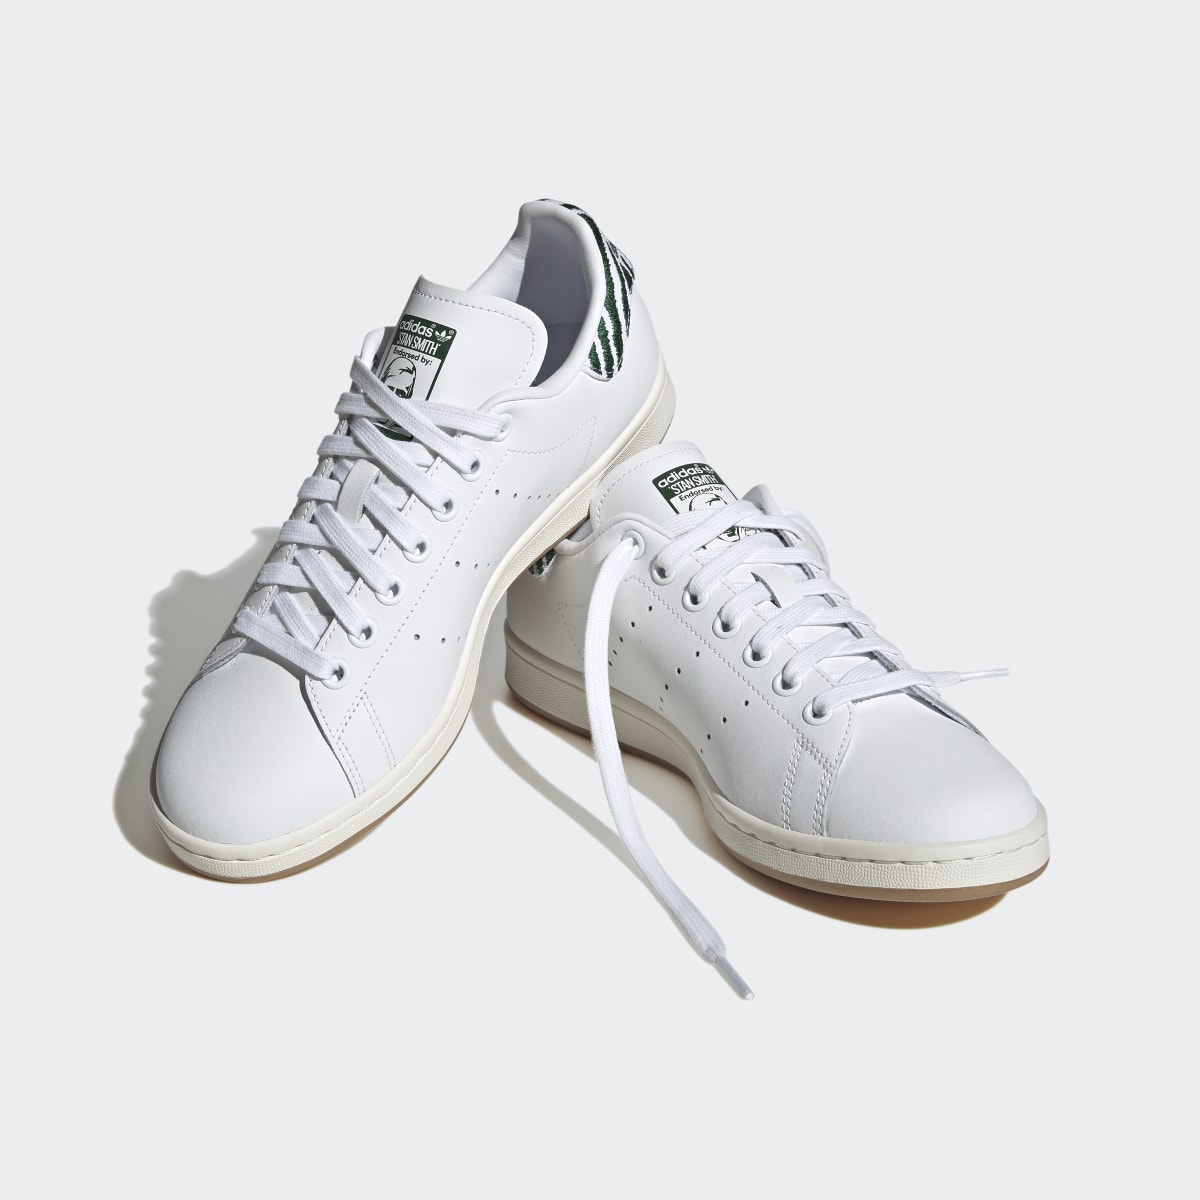 Adidas Stan Smith Shoes. 5